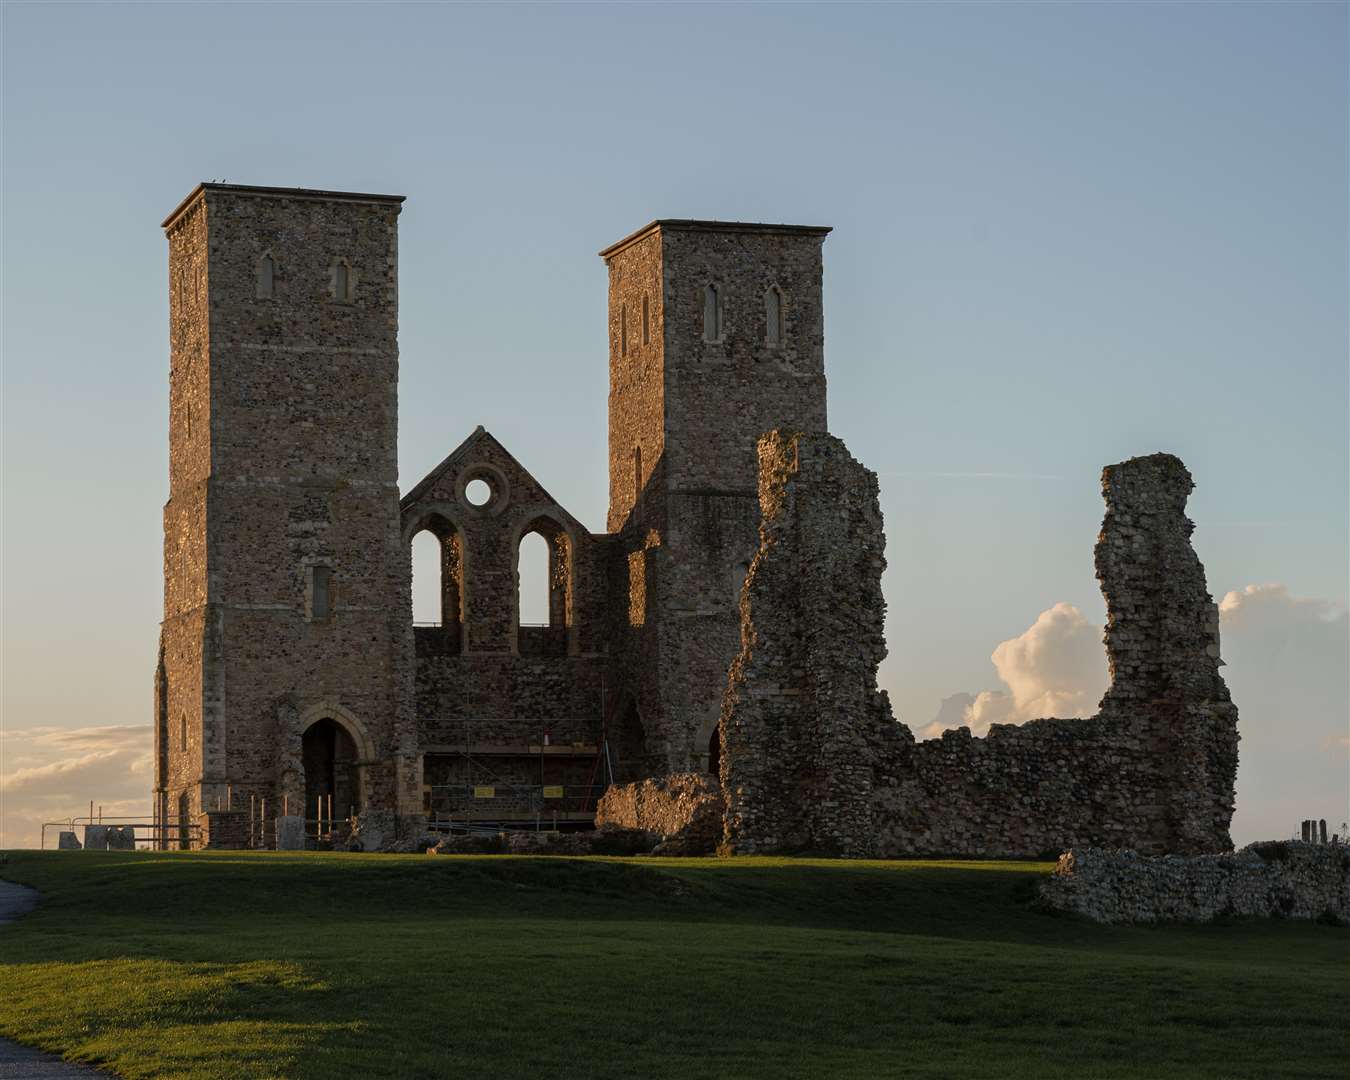 It is hoped that visitors to Reculver Towers will be able to enjoy an augmented reality experience